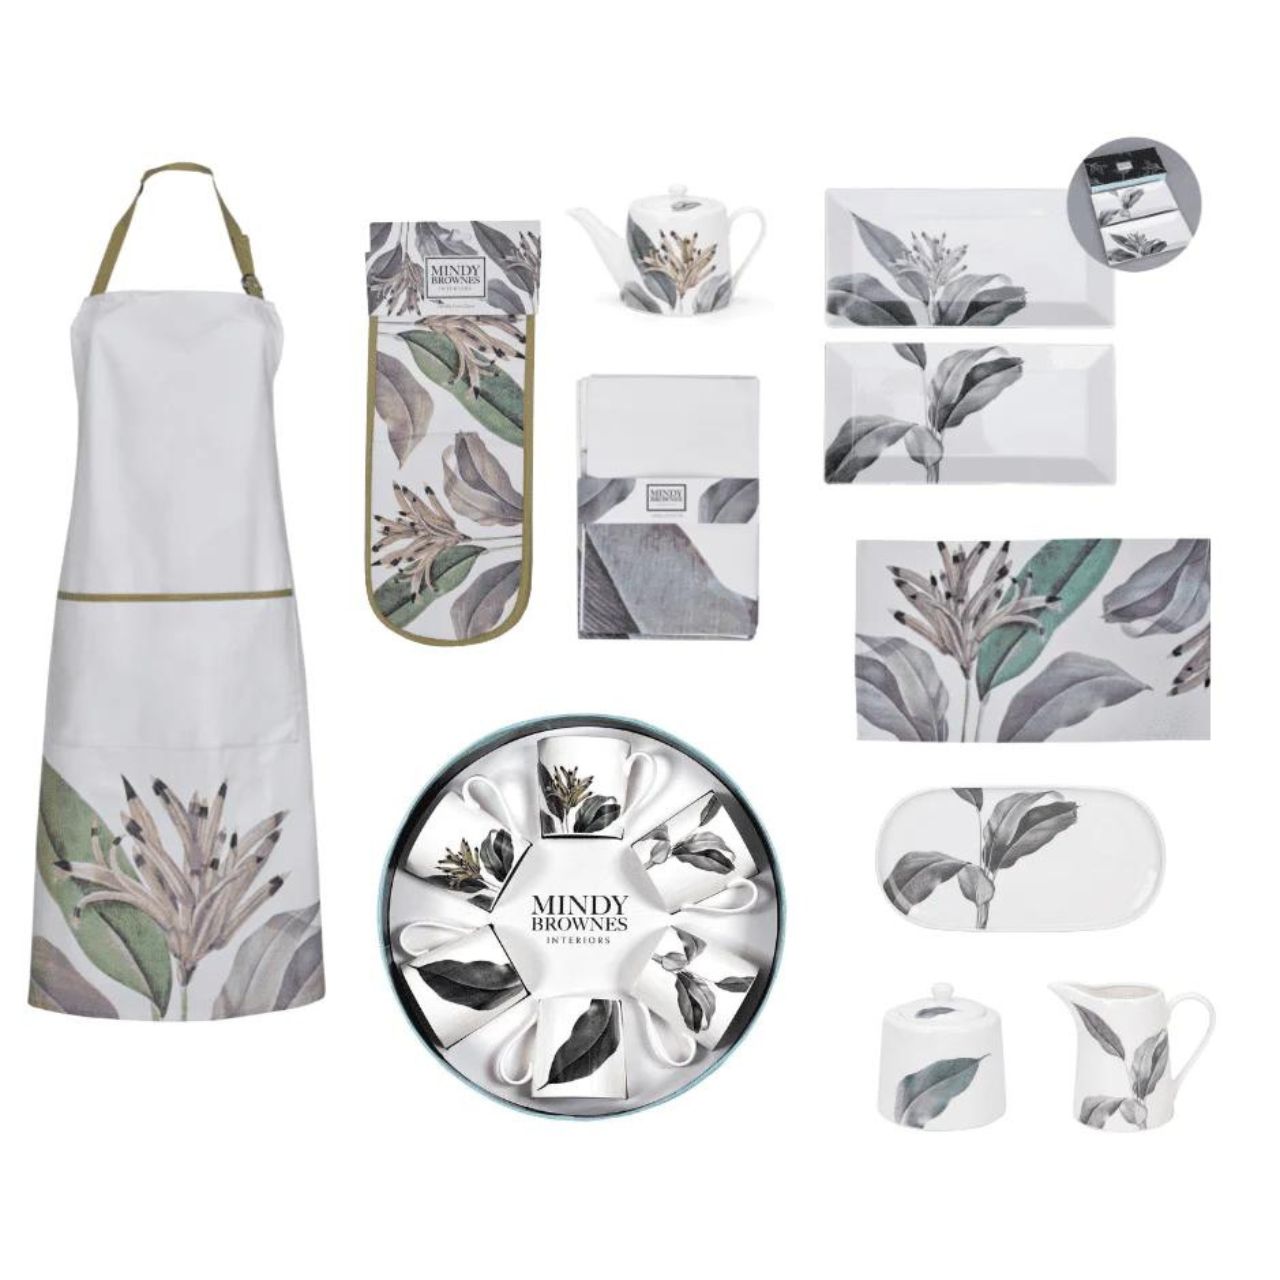 Birds of Paradise Tea Pot by Mindy Brownes Interiors  Latest addition to the Birds Of Paradise Tabletop Collection  - Inspired with classic shades of green, gold & grey. - Ideal house warming gift, new home, birthday, or general occasion.